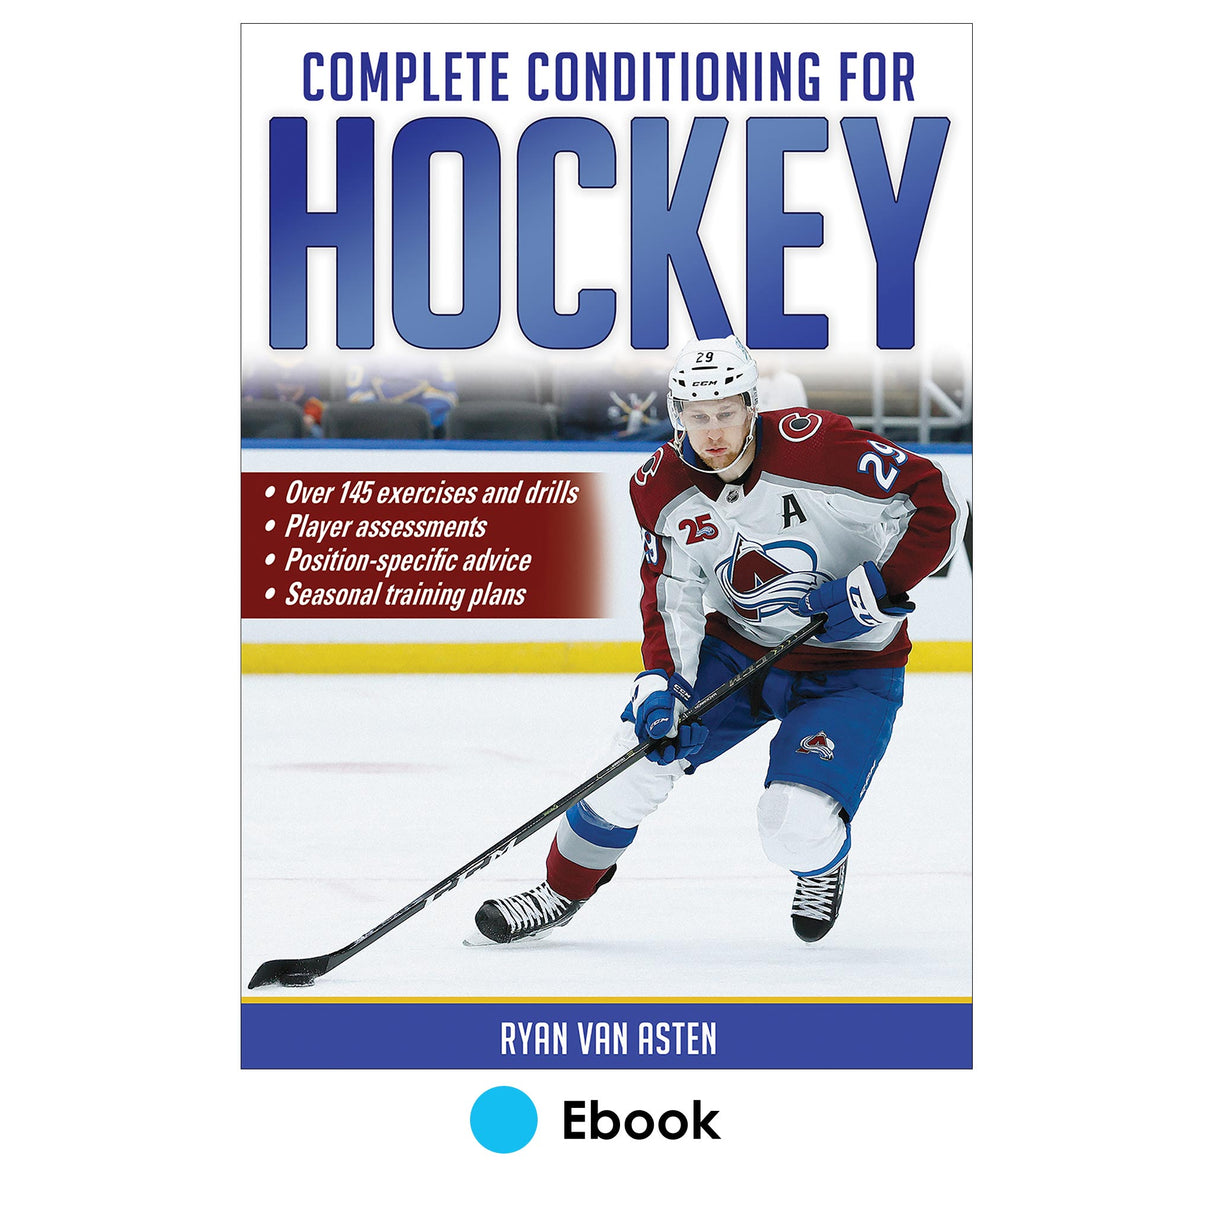 Complete Conditioning for Hockey epub